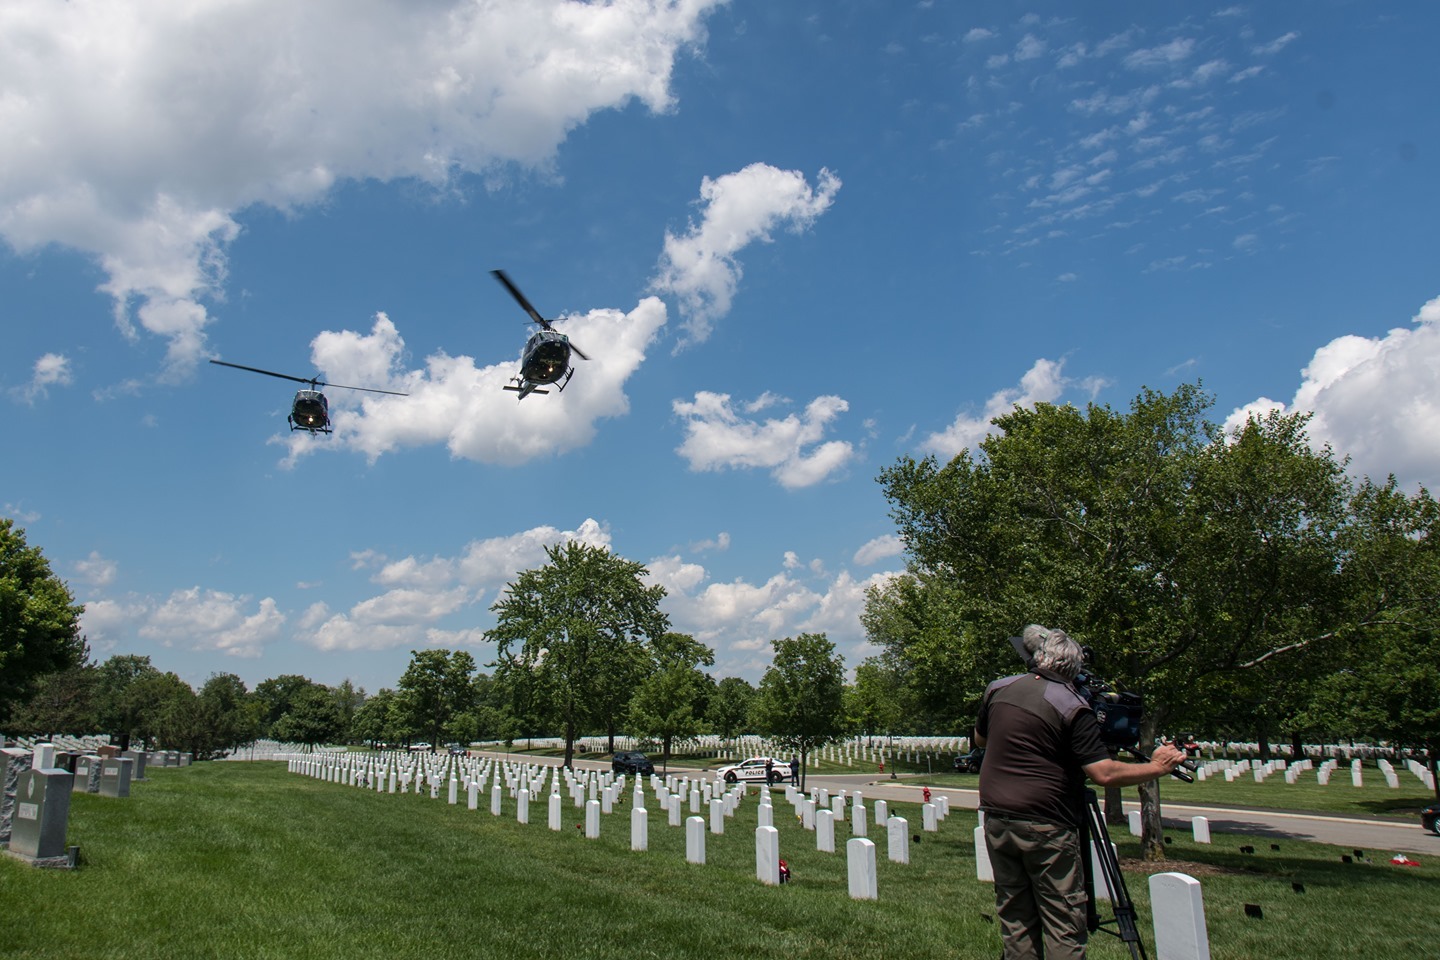 Huey helicopters, or Army UH-1 Iroquois helicopters fly over Clifford Crittenden of Arlington Media during a service we were covering earlier this year.